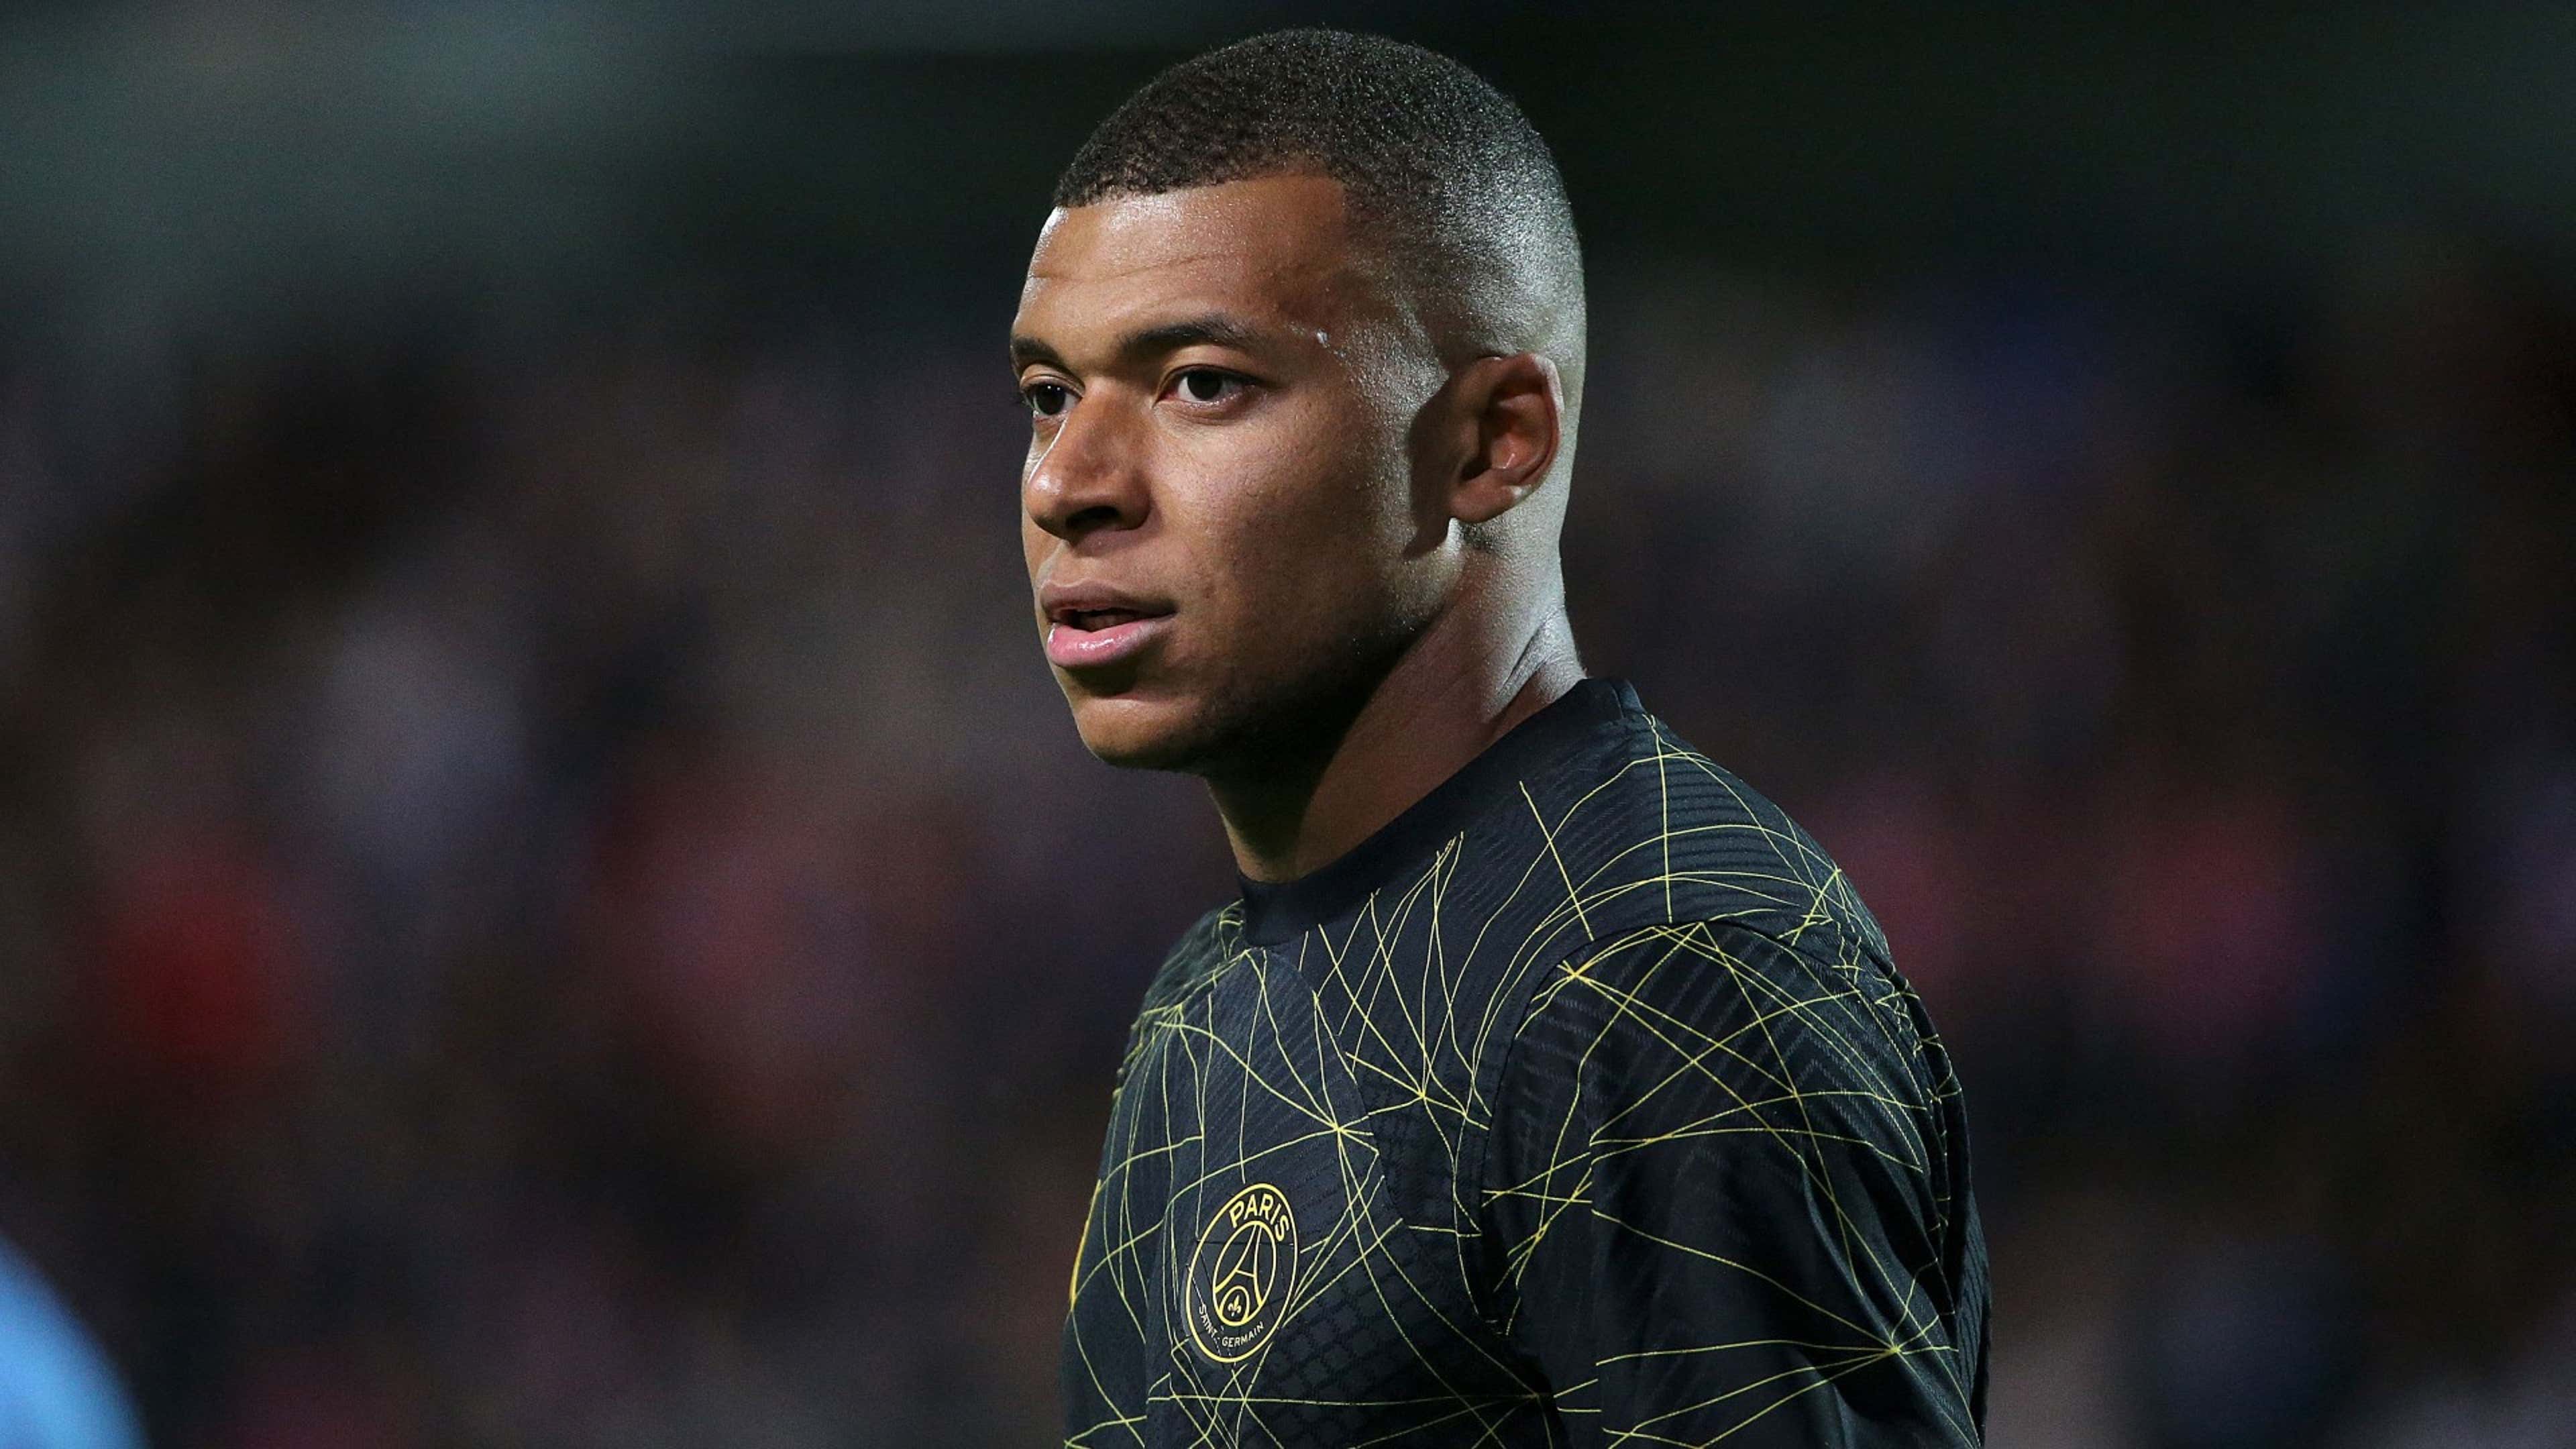 I'm never satisfied' - PSG superstar Kylian Mbappe gives cryptic response  when asked where his future lies amid continued Real Madrid chatter